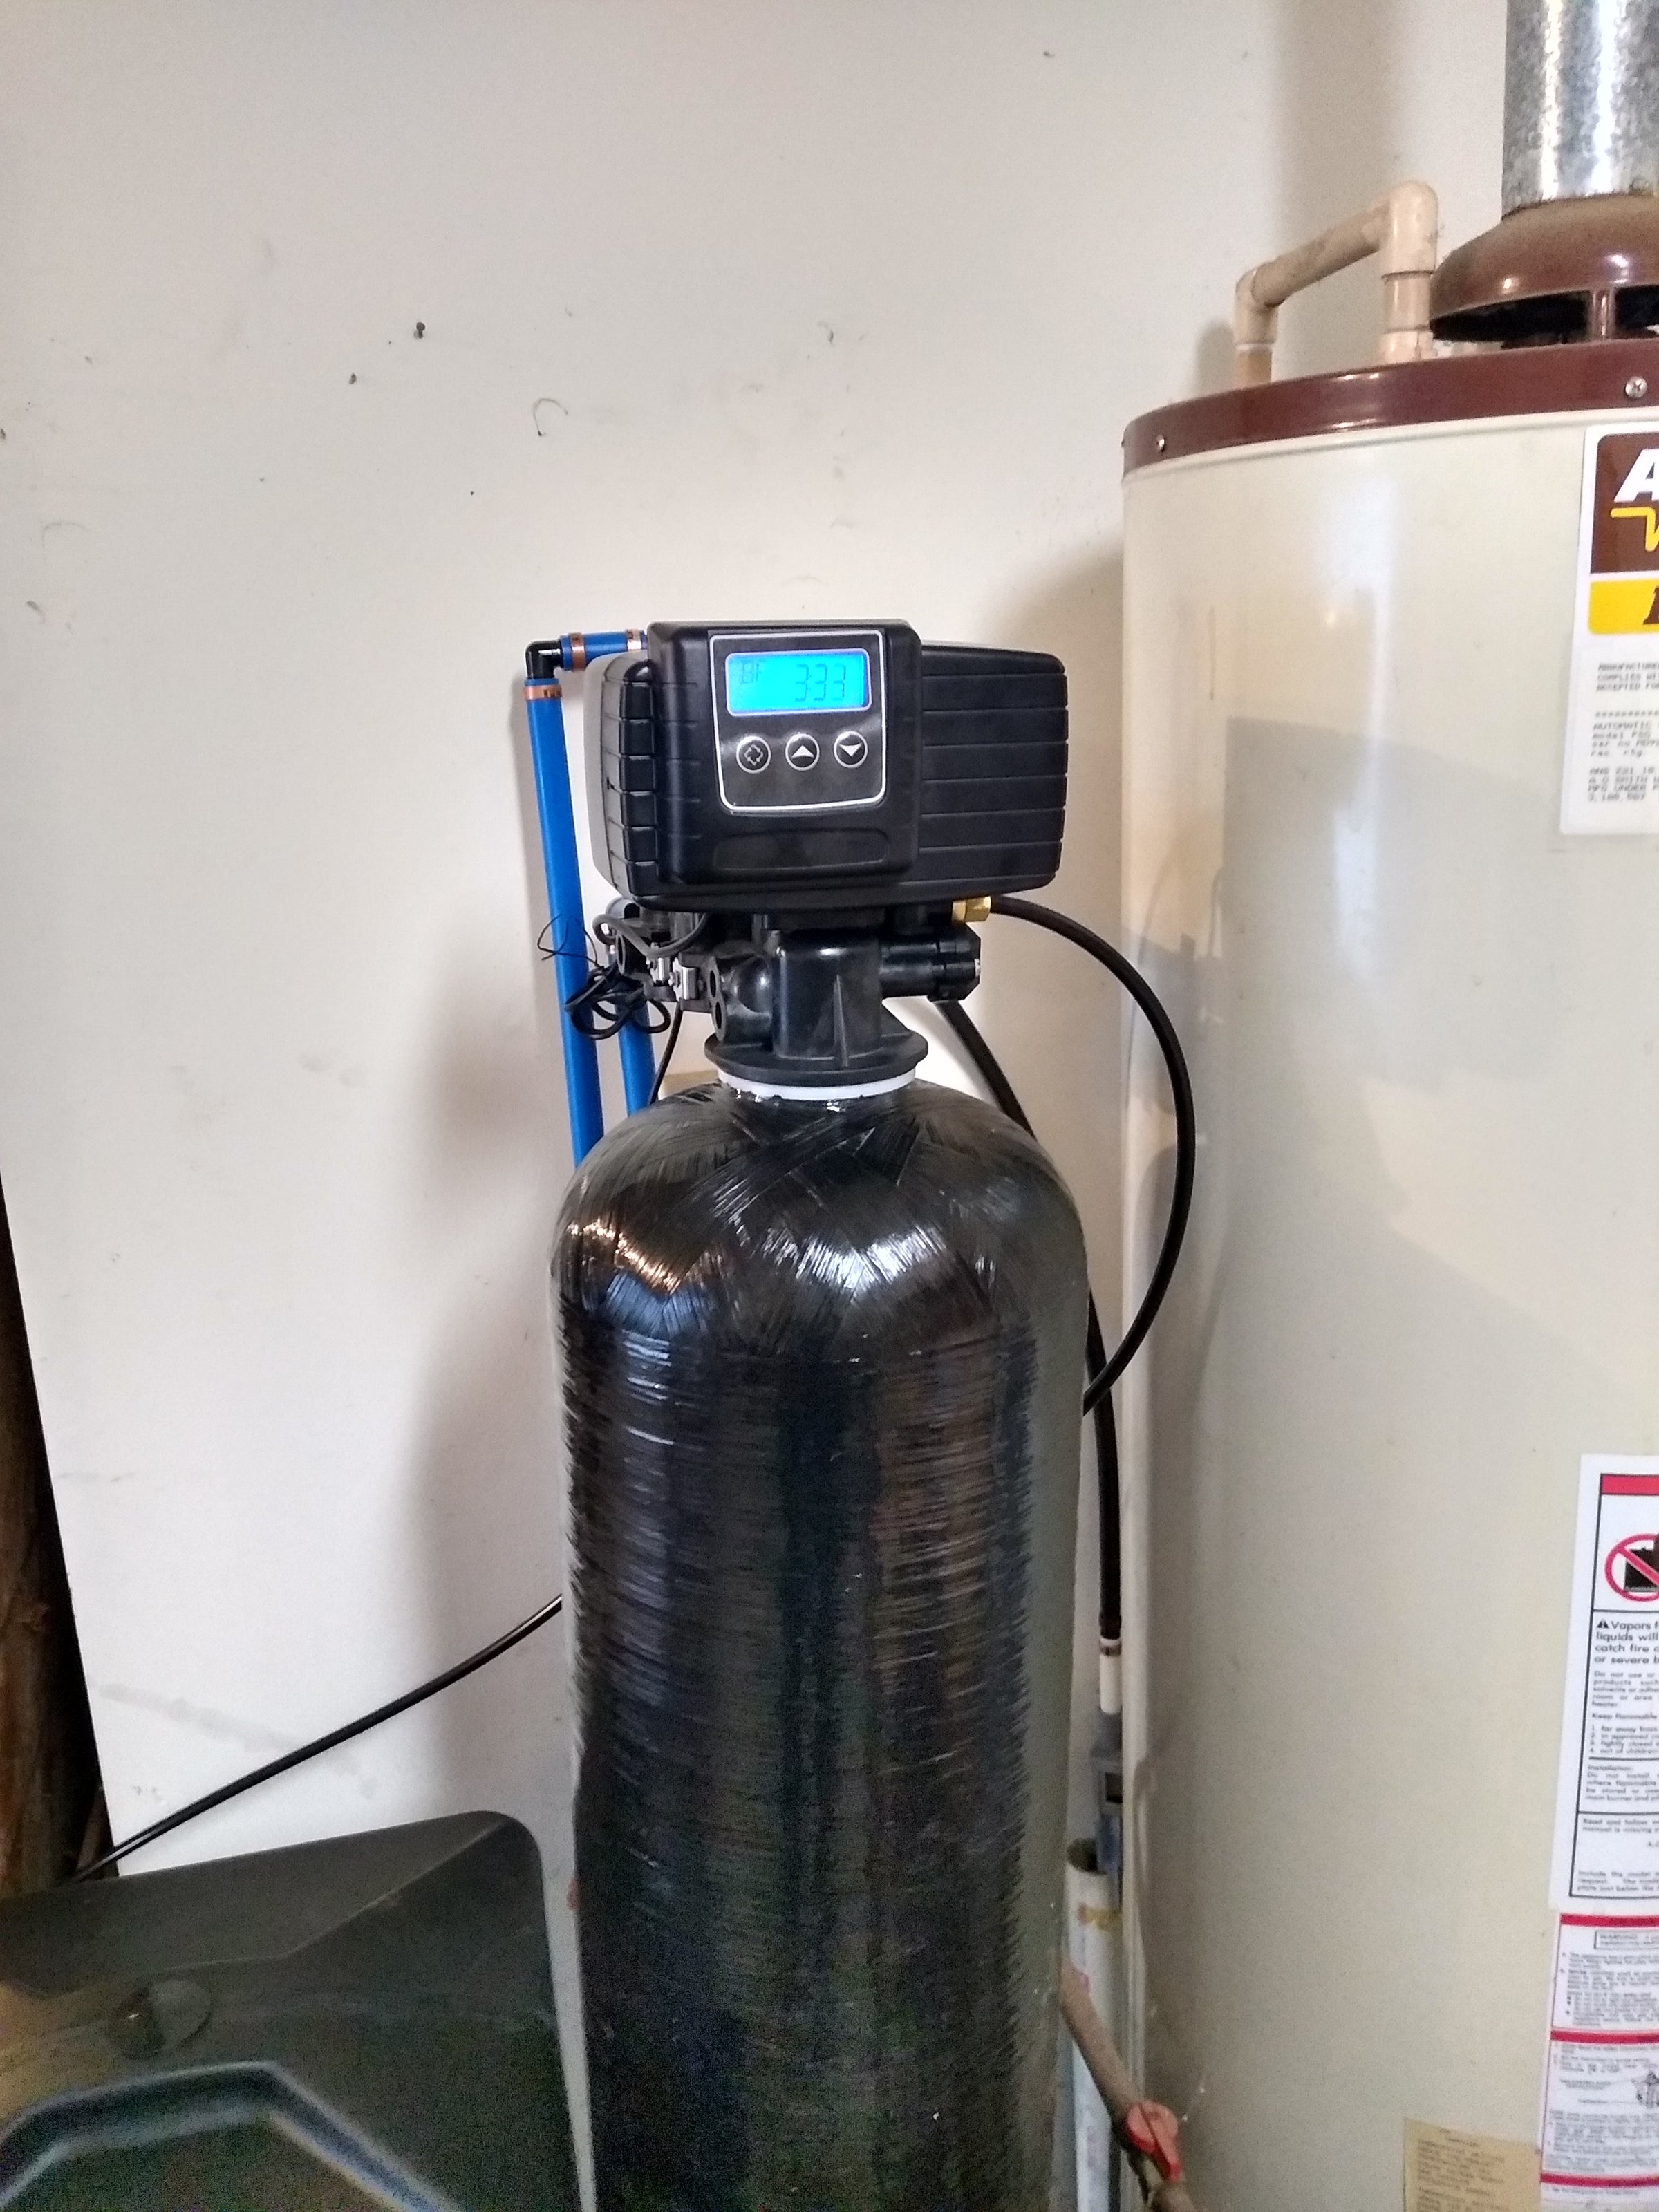 WaterSoft Water Softeners - Paquette Plumbing